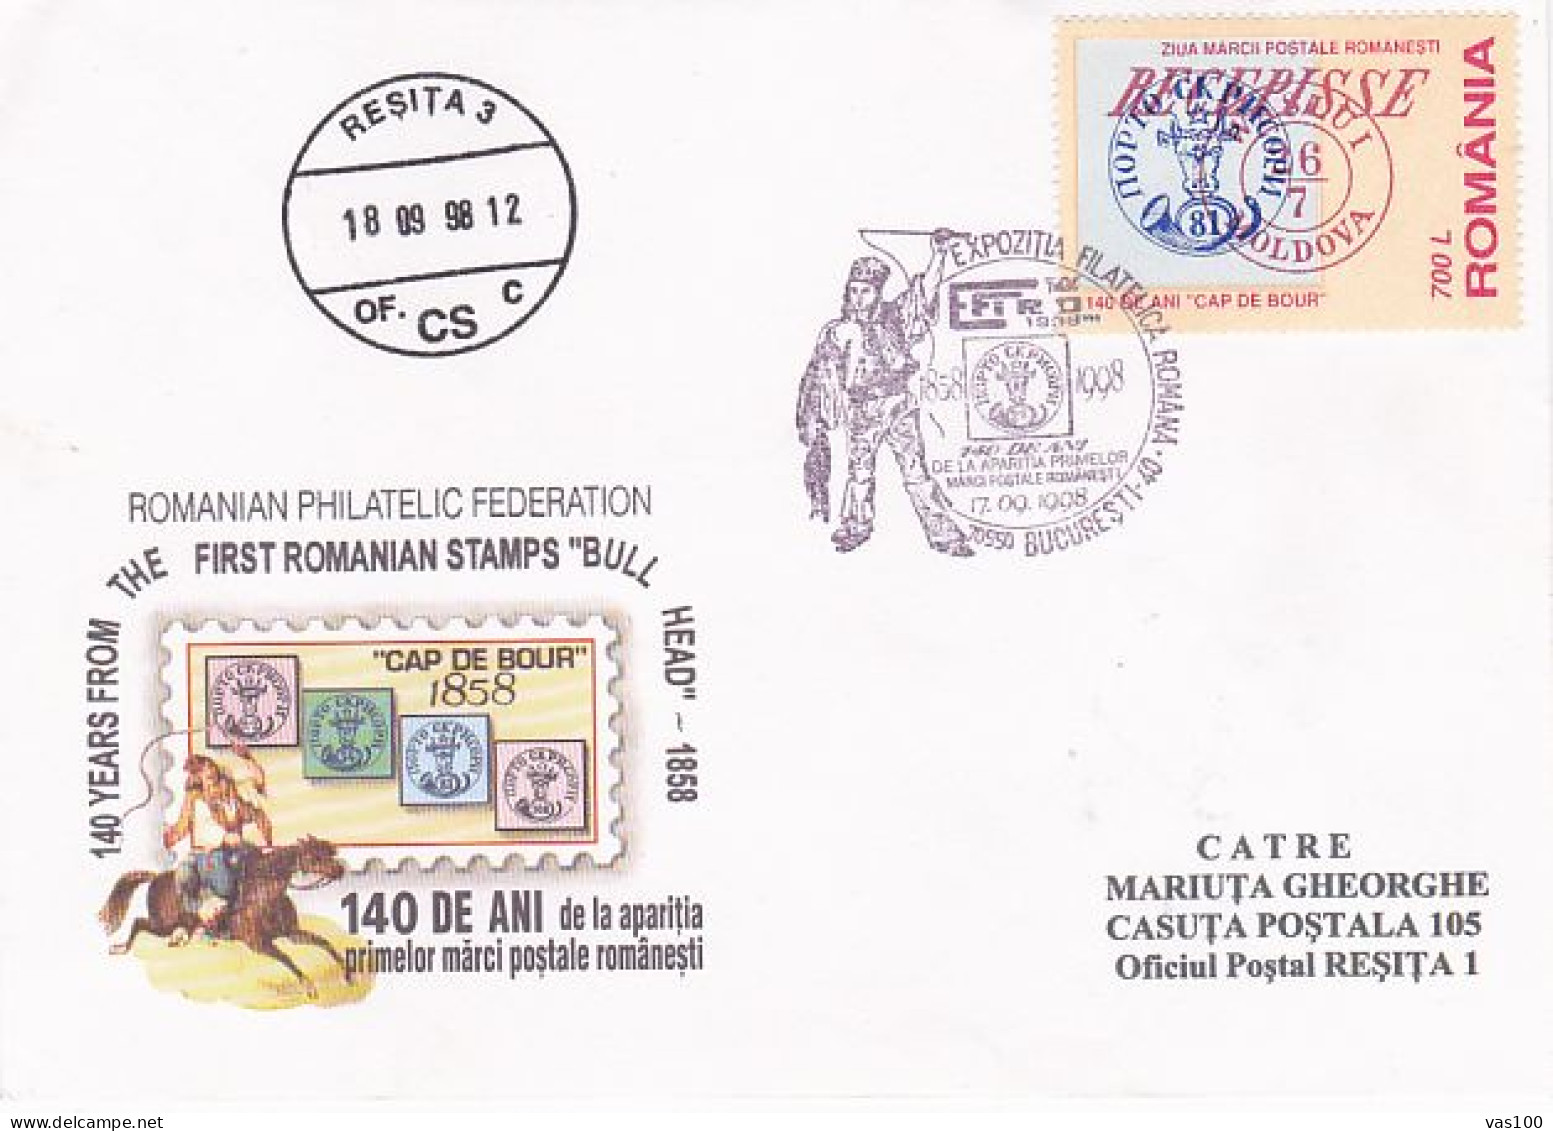 FIRST ROMANIAN STAMP ANNIVERSARY, BULL'S HEAD, OVERPRINT STAMP, SPECIAL COVER, 1998, ROMANIA - Lettres & Documents